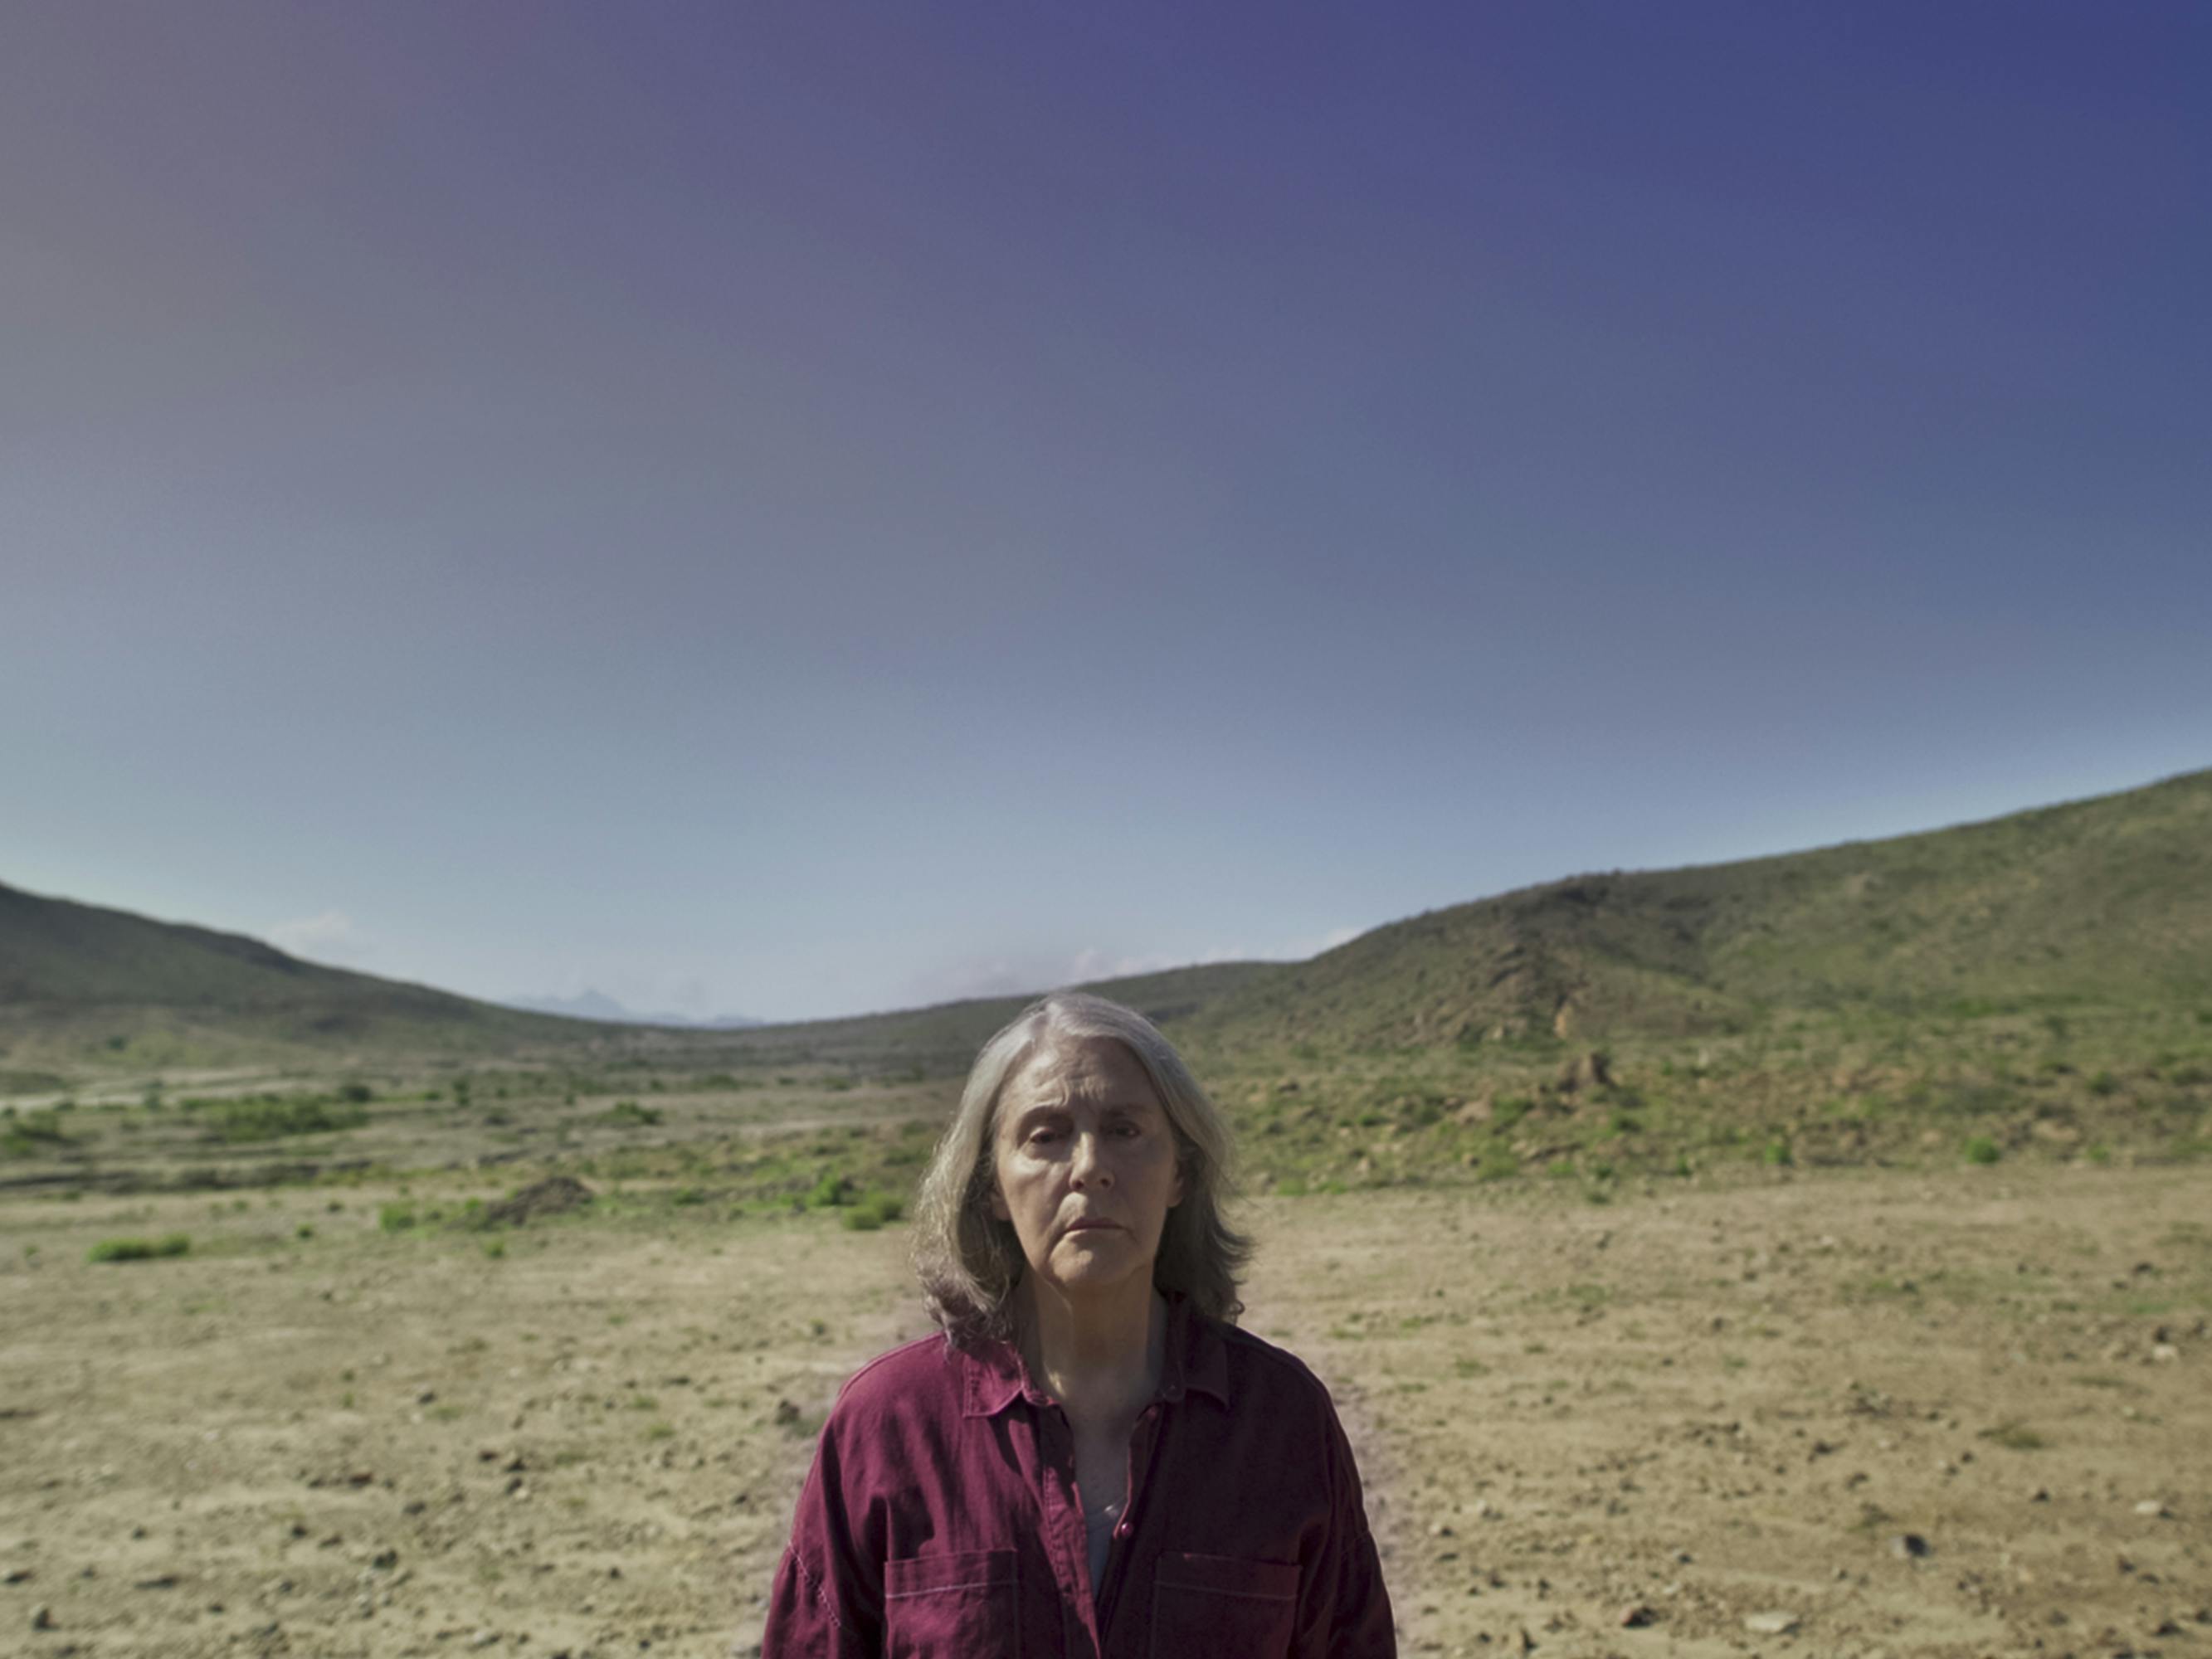 A woman wears a red shirt and stands in a barren landscape against a bright blue sky.